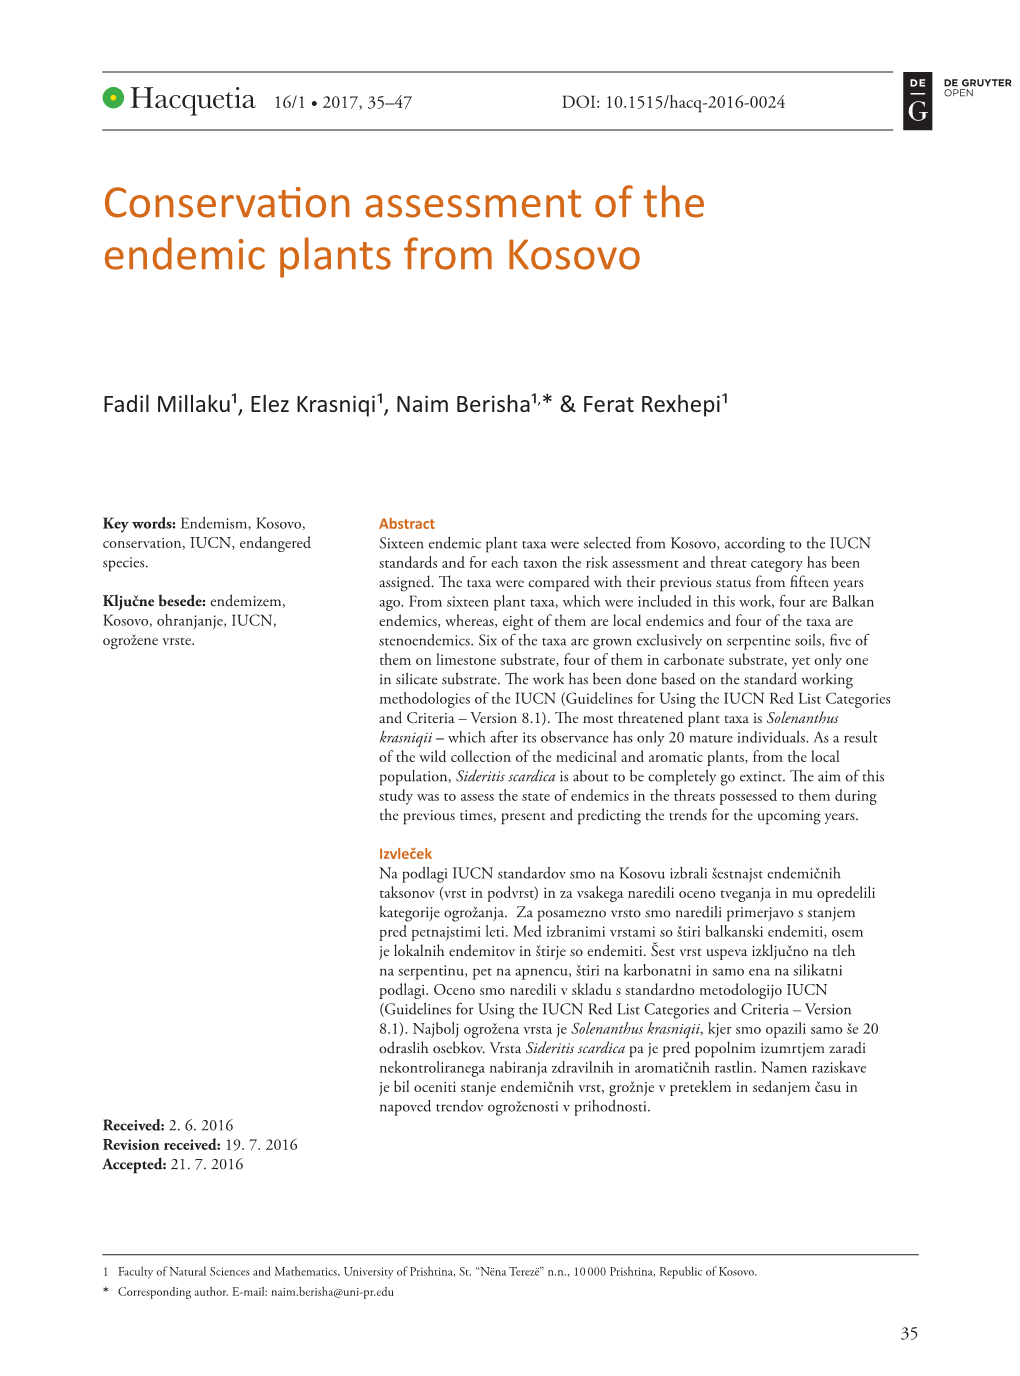 Conservation Assessment of the Endemic Plants from Kosovo